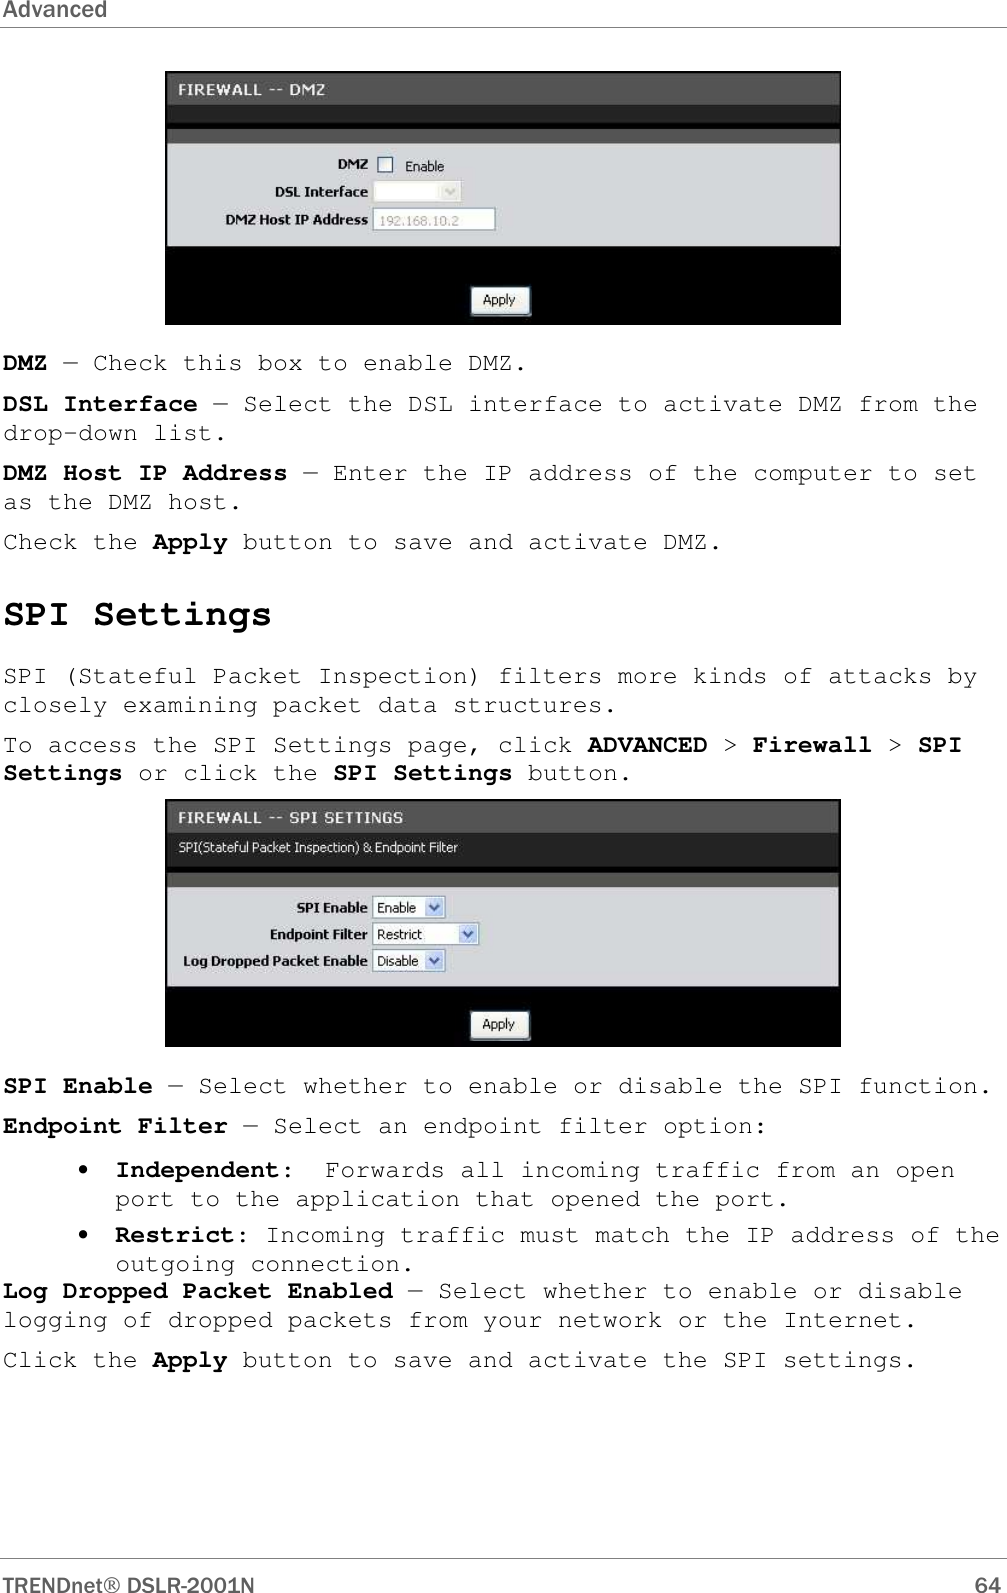 Advanced      TRENDnet DSLR-2001N        64  DMZ — Check this box to enable DMZ. DSL Interface — Select the DSL interface to activate DMZ from the drop-down list. DMZ Host IP Address — Enter the IP address of the computer to set as the DMZ host. Check the Apply button to save and activate DMZ. SPI Settings SPI (Stateful Packet Inspection) filters more kinds of attacks by closely examining packet data structures.  To access the SPI Settings page, click ADVANCED &gt; Firewall &gt; SPI Settings or click the SPI Settings button.  SPI Enable — Select whether to enable or disable the SPI function. Endpoint Filter — Select an endpoint filter option: • Independent:  Forwards all incoming traffic from an open port to the application that opened the port. • Restrict: Incoming traffic must match the IP address of the outgoing connection. Log Dropped Packet Enabled — Select whether to enable or disable logging of dropped packets from your network or the Internet. Click the Apply button to save and activate the SPI settings. 